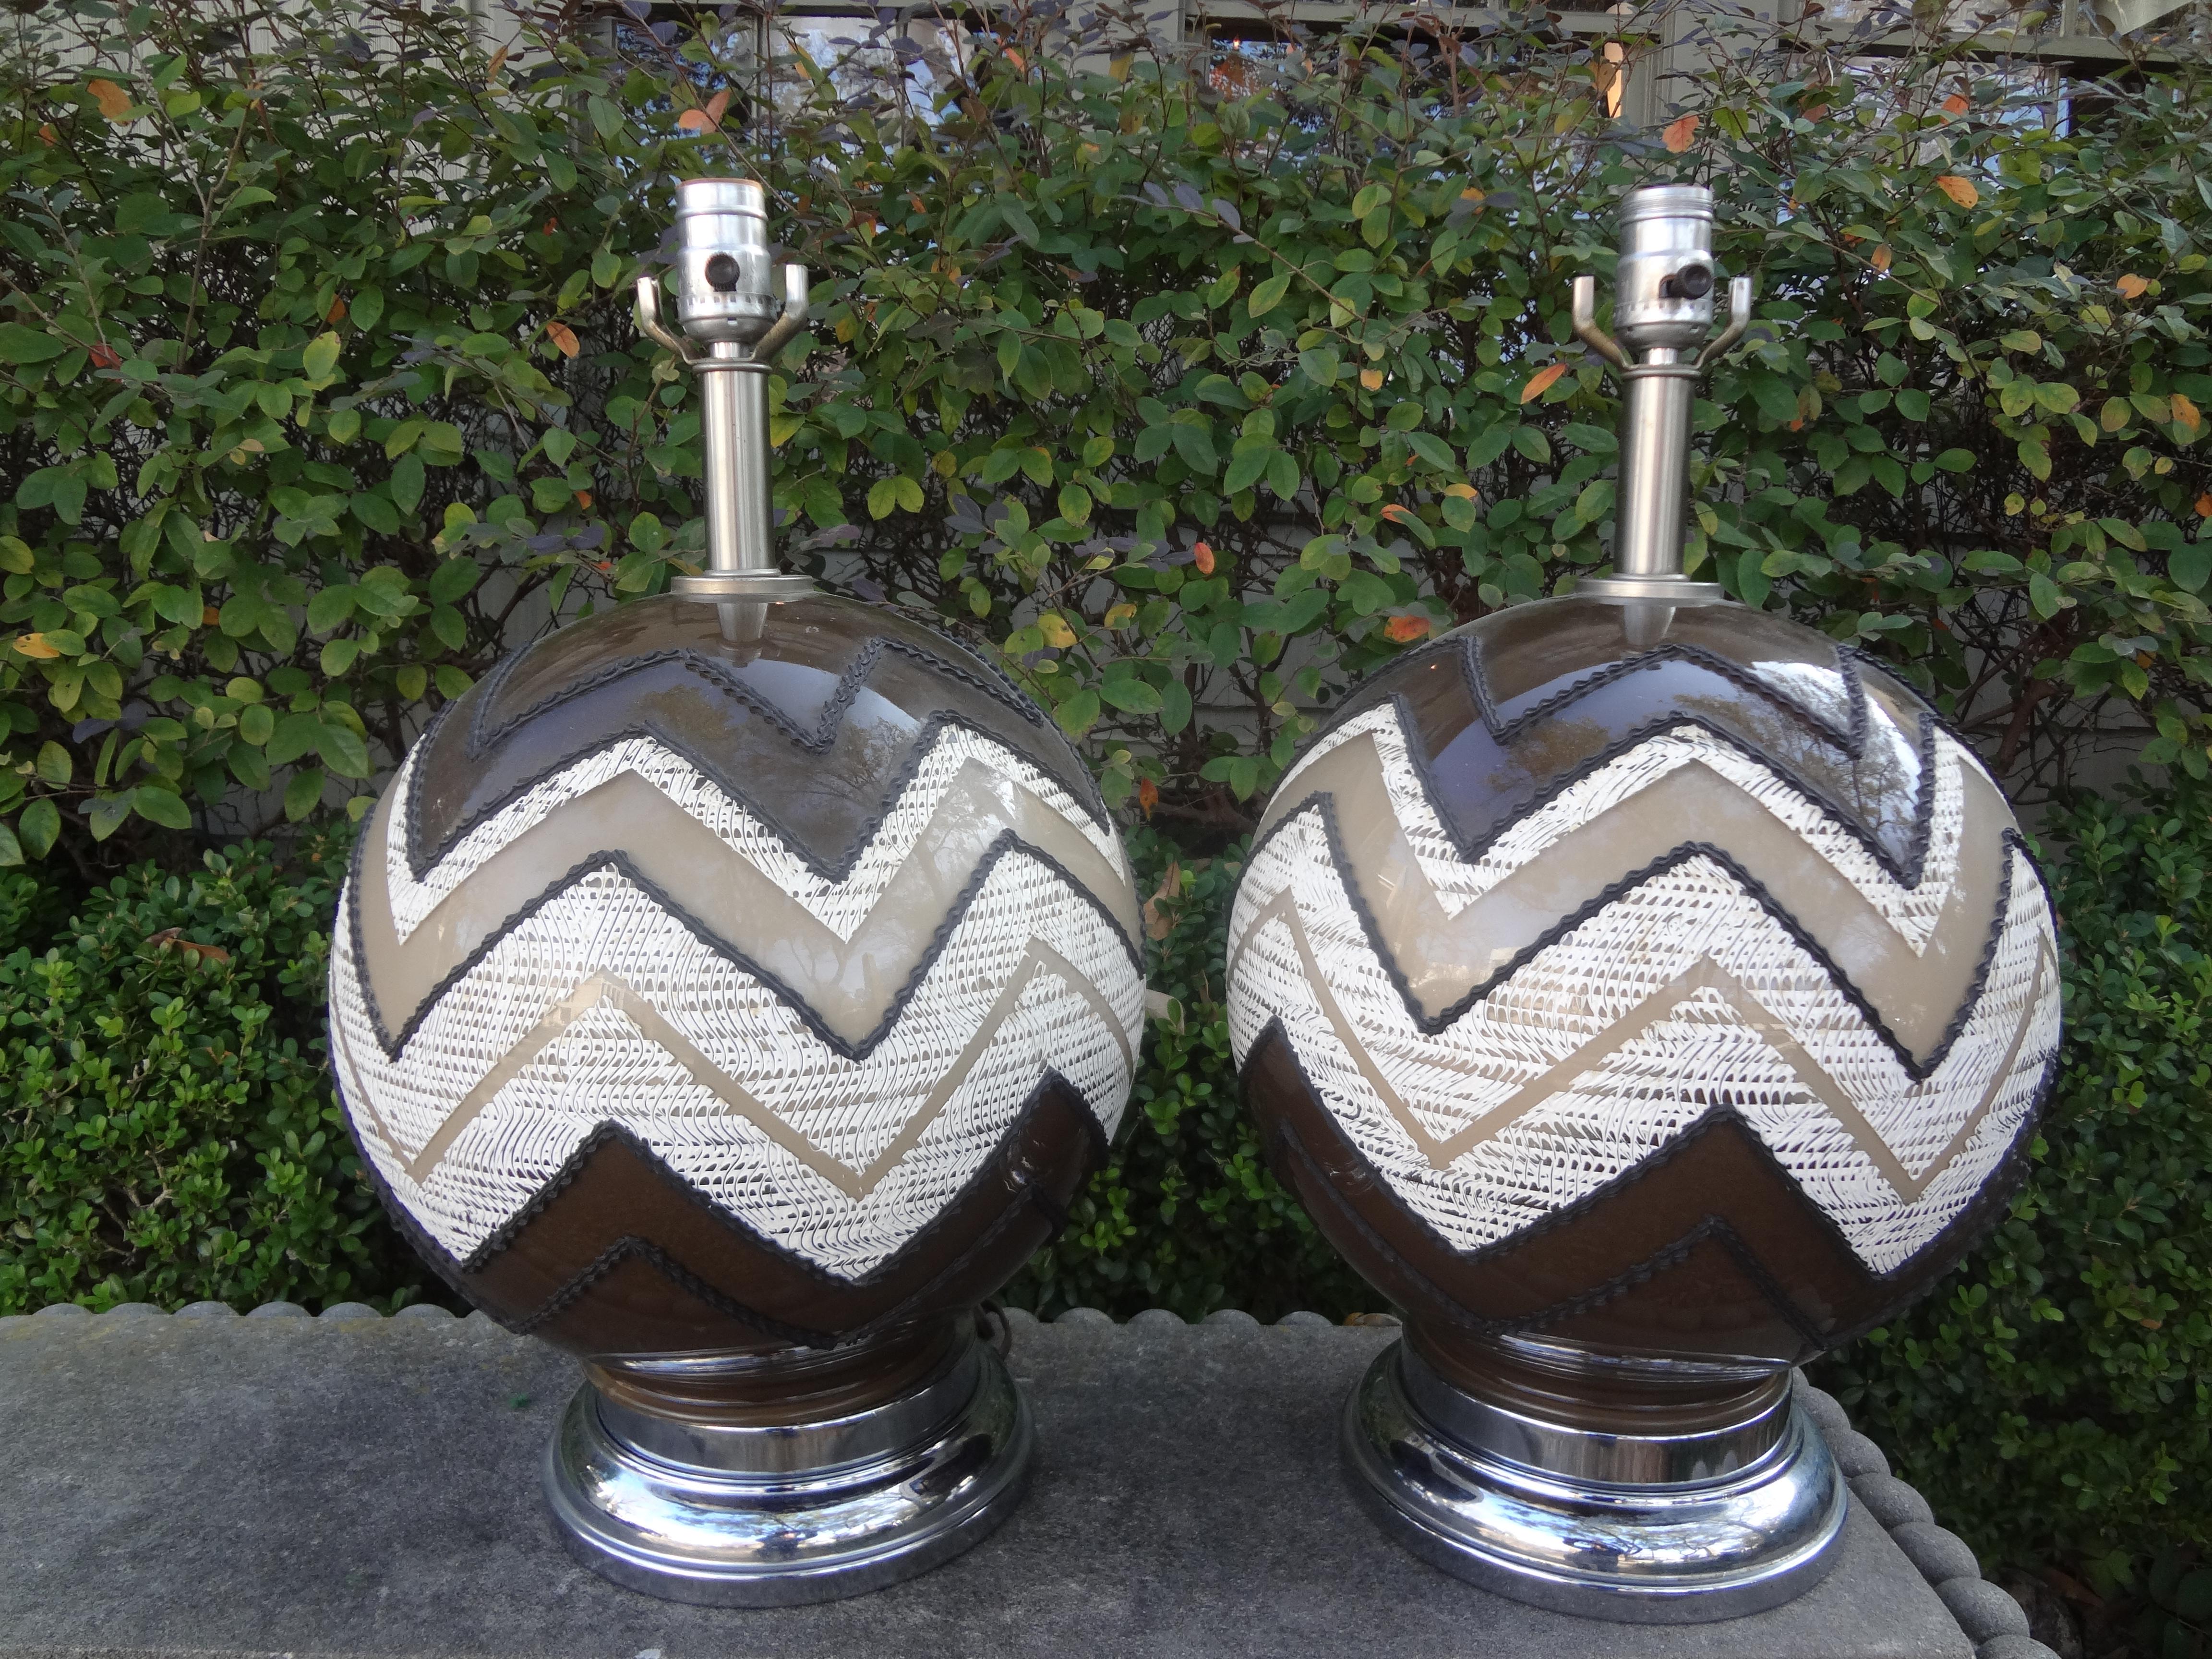 Pair of Mid-Century Modern lamps.
Great pair of Mid-Century Modern glass lamps with a geometric design in neutral tones of brown, white and tan. Our Hollywood Regency or modernist lamps have been newly wired and are ready for your choice of shades.